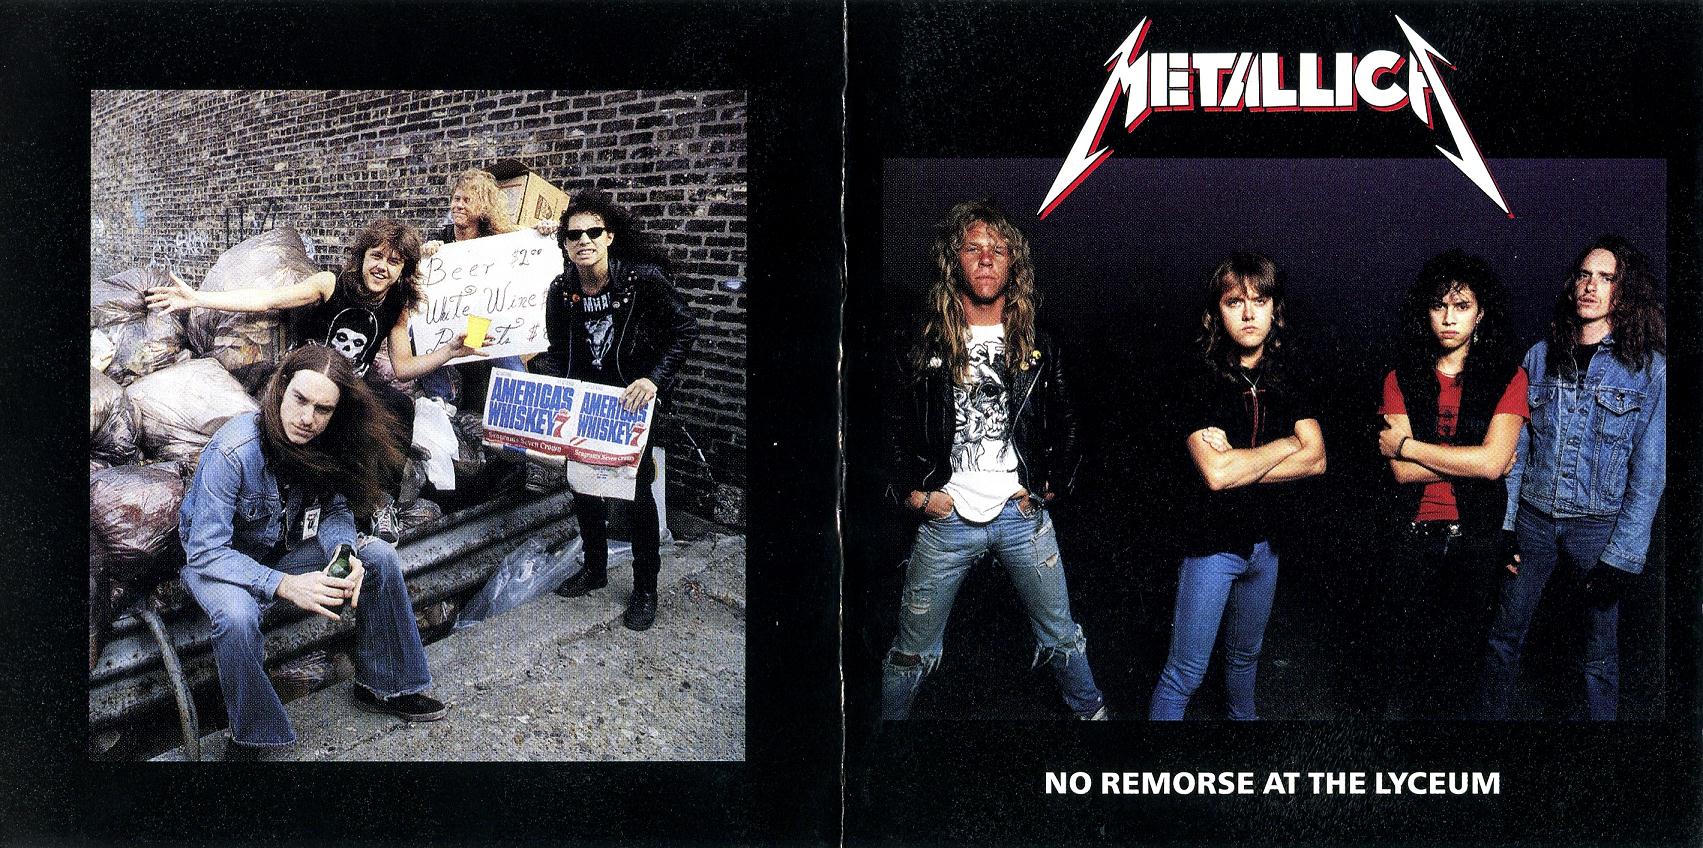 1984-11-12-NO_REMORSE_AT_THE_LYCEUM-front